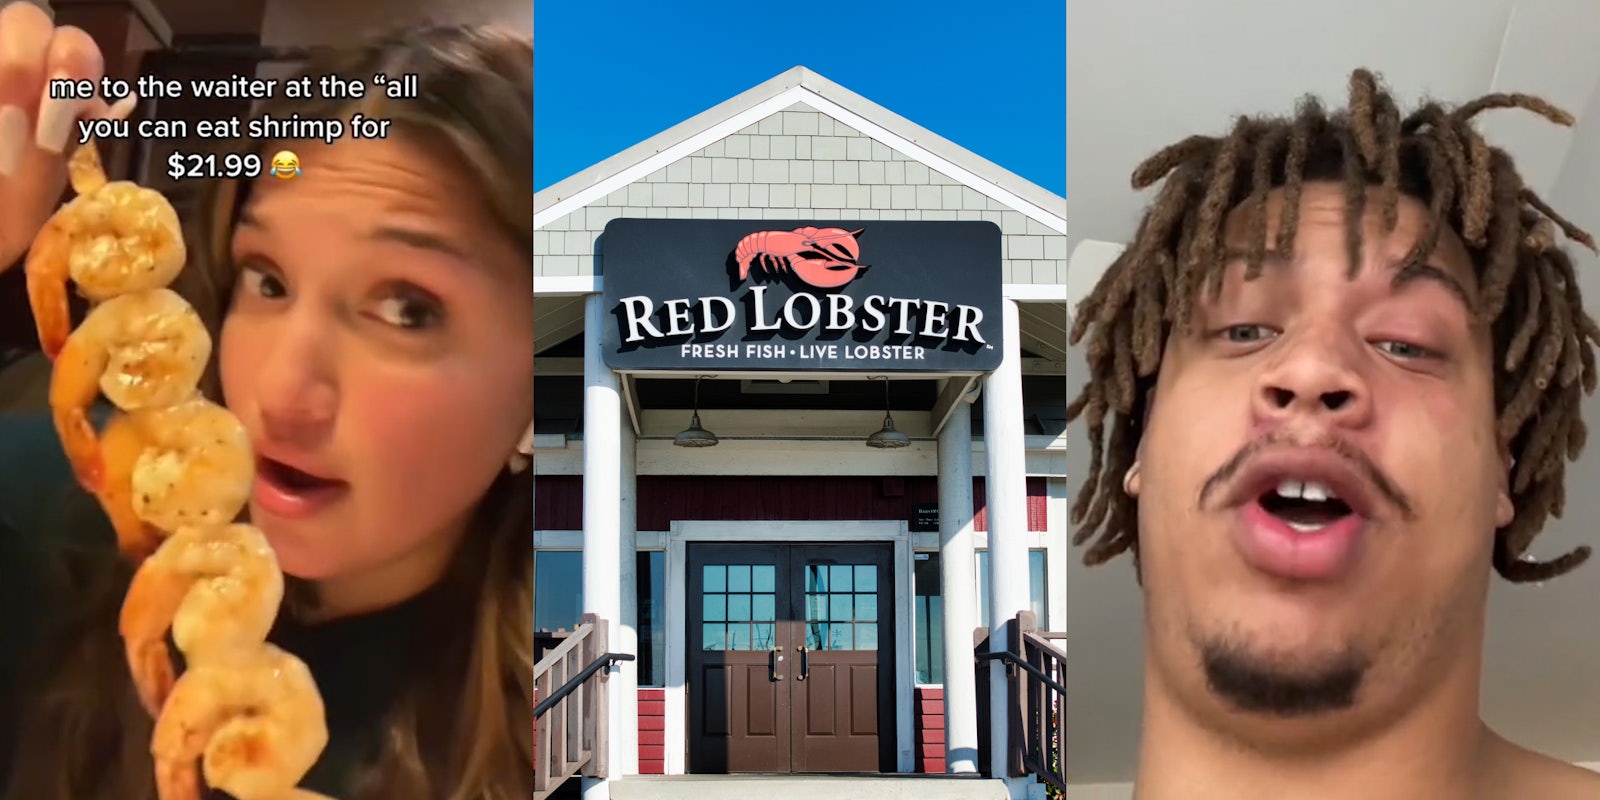 customer at Red Lobster holding shrimp caption 'me to the waiter at the 'all you can eat shrimp for $21.99' (l) Red Lobster sign over doorway on building (c) former Red Lobster waiter speaking (r)